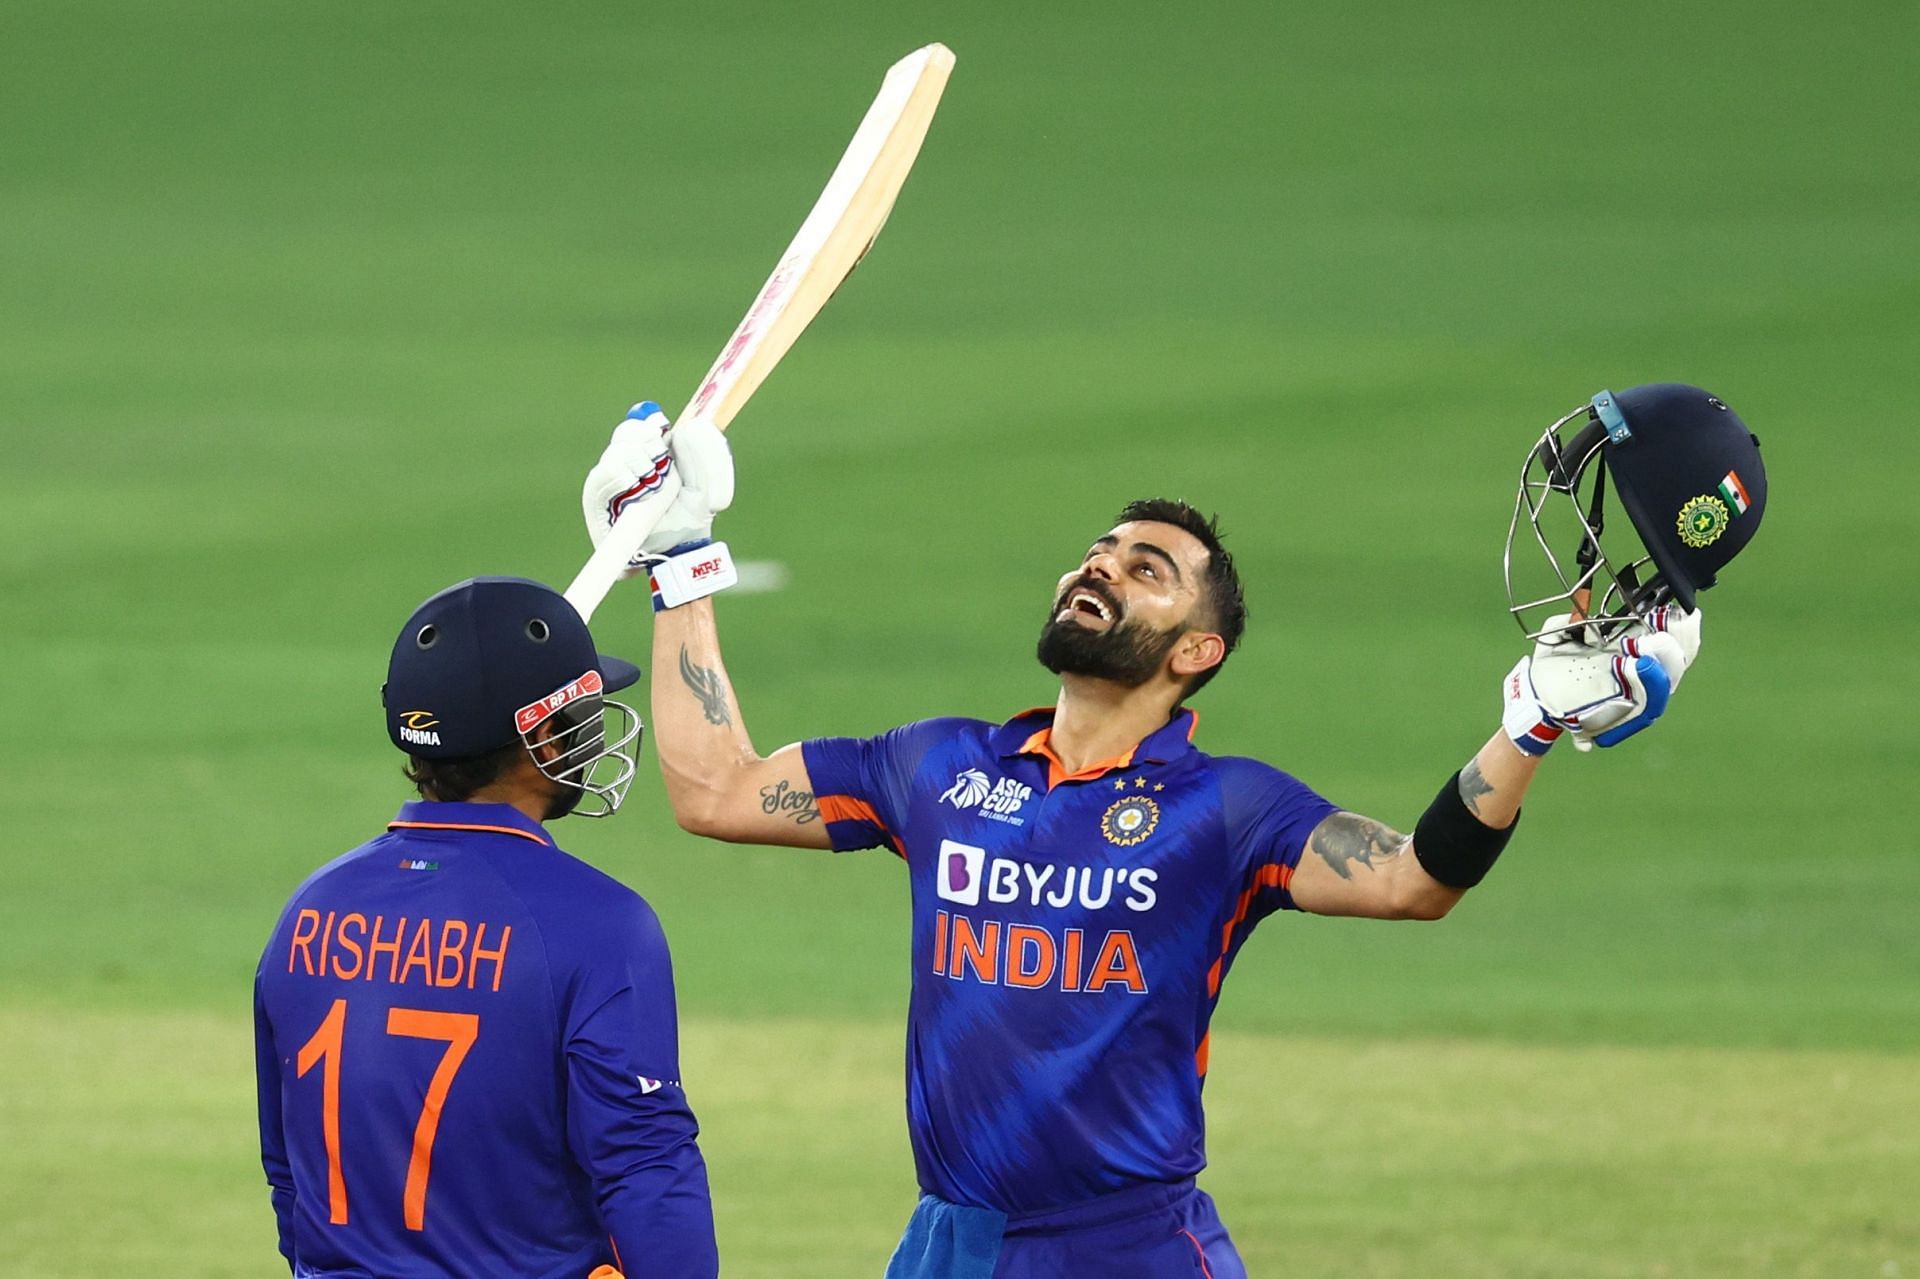 Virat Kohli celebrates after reaching his century in the Asia Cup. Pic: Getty Images